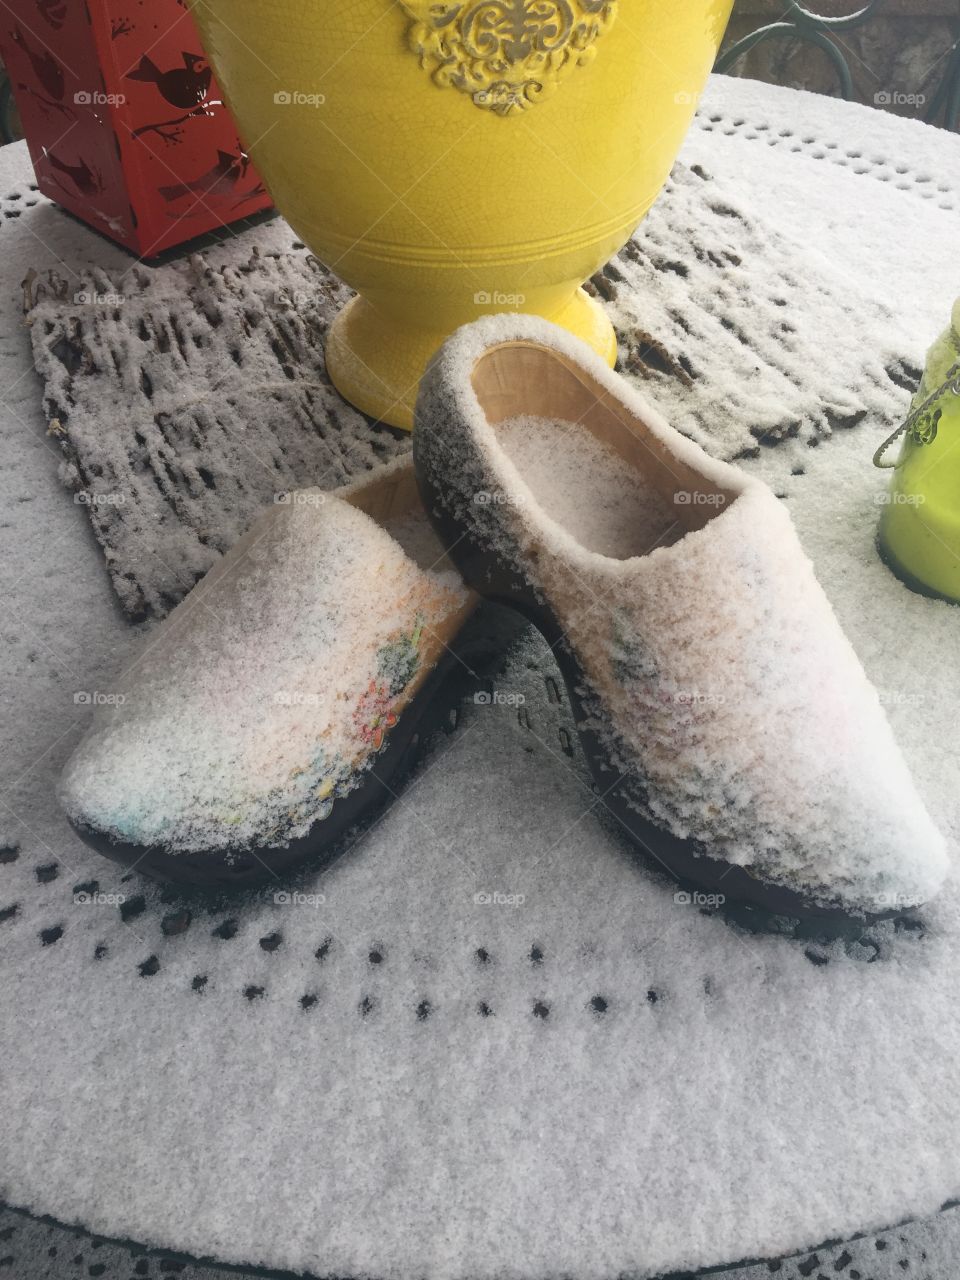 Frosty wooden shoes